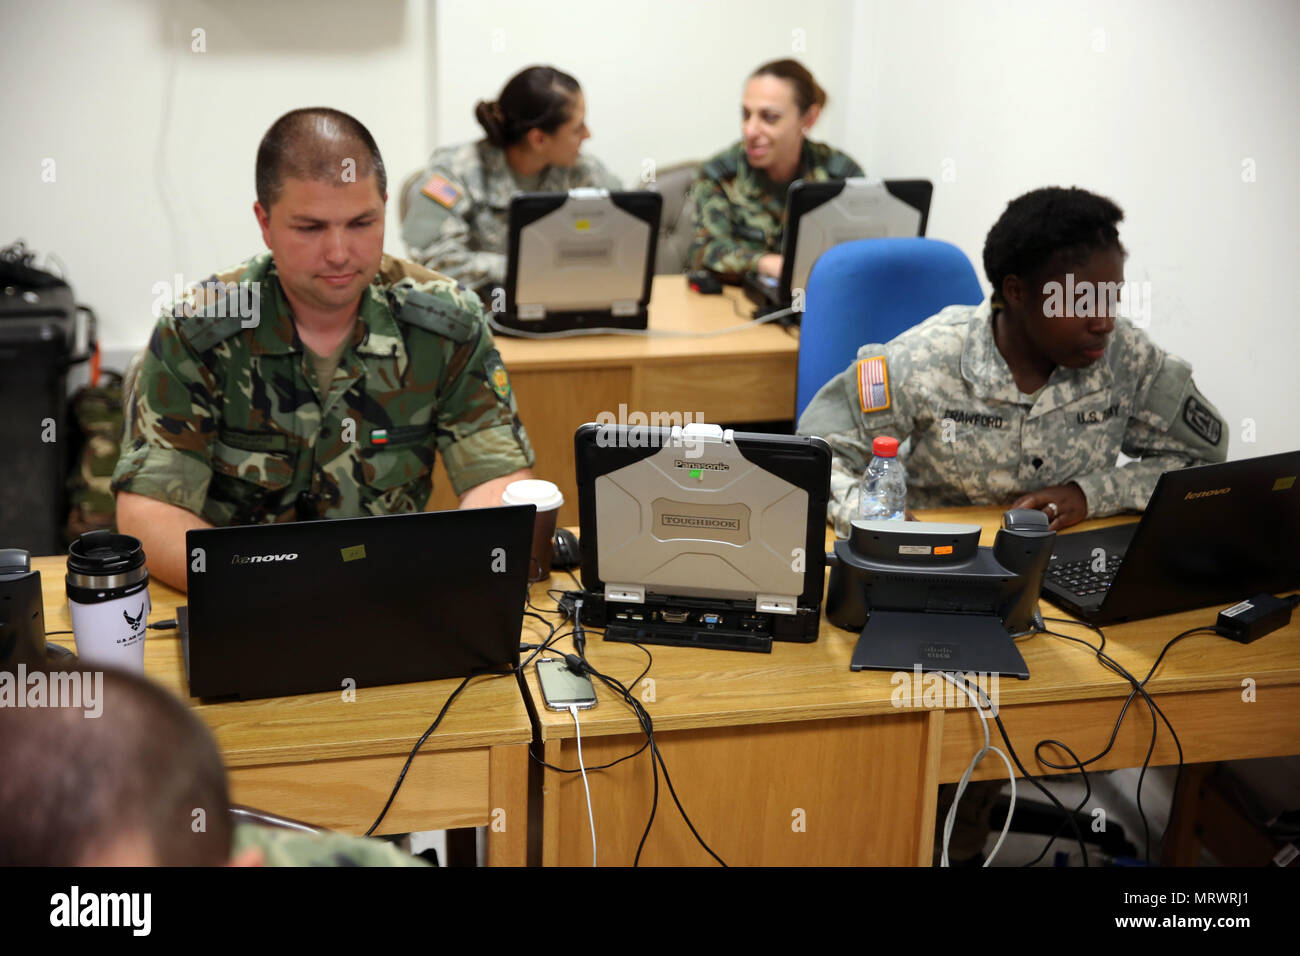 U.S. Army Spc. Cheryl Crawford (front right) and Sgt. Jacline Robledo (back left), both information technology specialists assigned to the 86th Expeditionary Signal Battalion, 11th Signal Brigade, work with Bulgarian Army Soldiers assigned to the 61st Mechanized Brigade G-6 Communications and Information Management section, July 12, 2017 at Novo Selo Training Area, Bulgaria. The 86th Expeditionary Signal Bn. is providing voice and data over Army Coalition Mission Environment, or ACME, network to the 61st Mechanized Brigade to enable a multinational command post exercise as part of exercise Sab Stock Photo